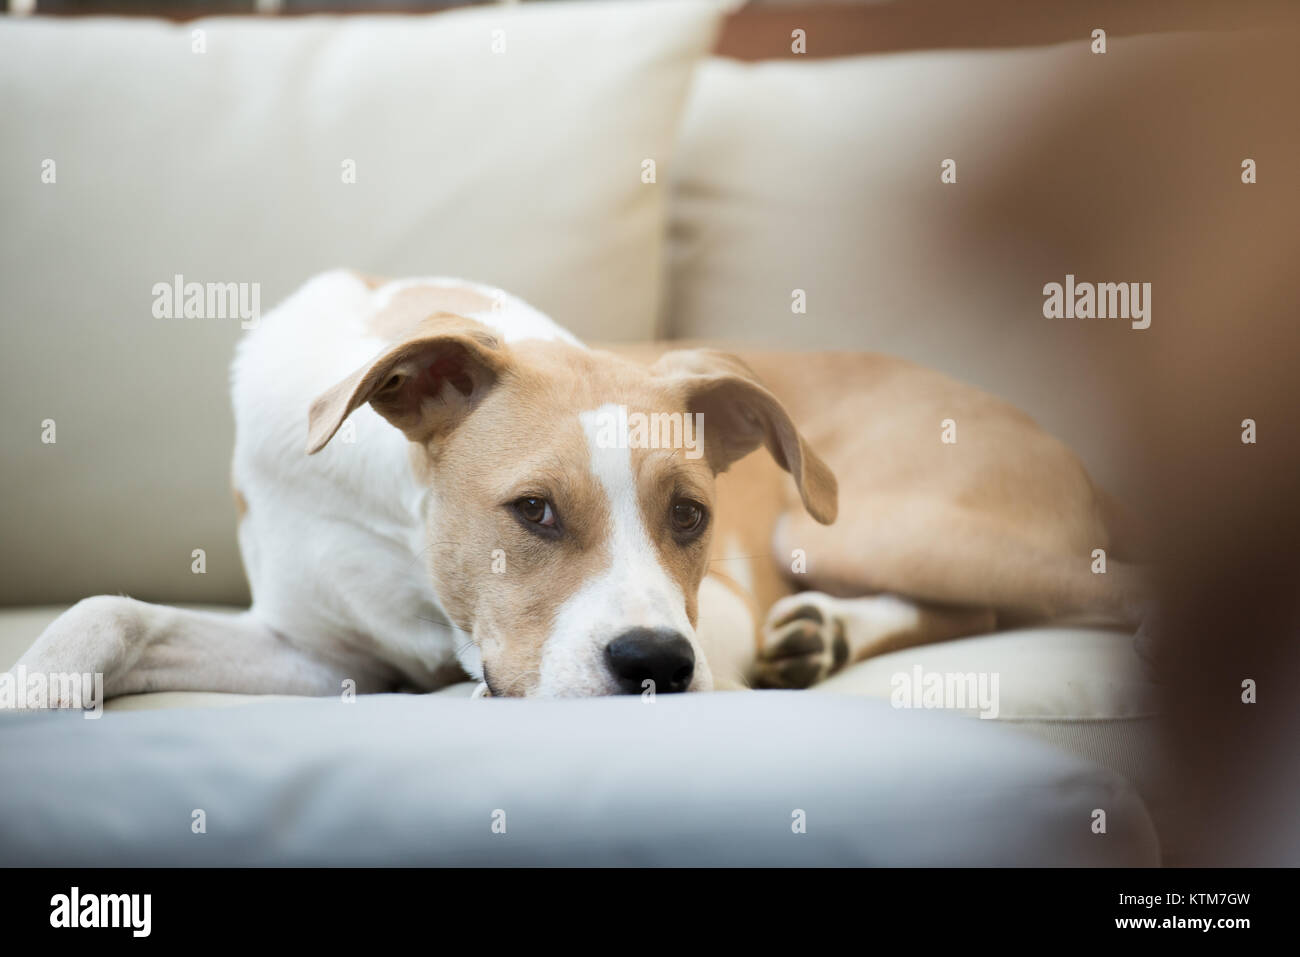 Young Dog Sleeping on Furniture Outside Stock Photo